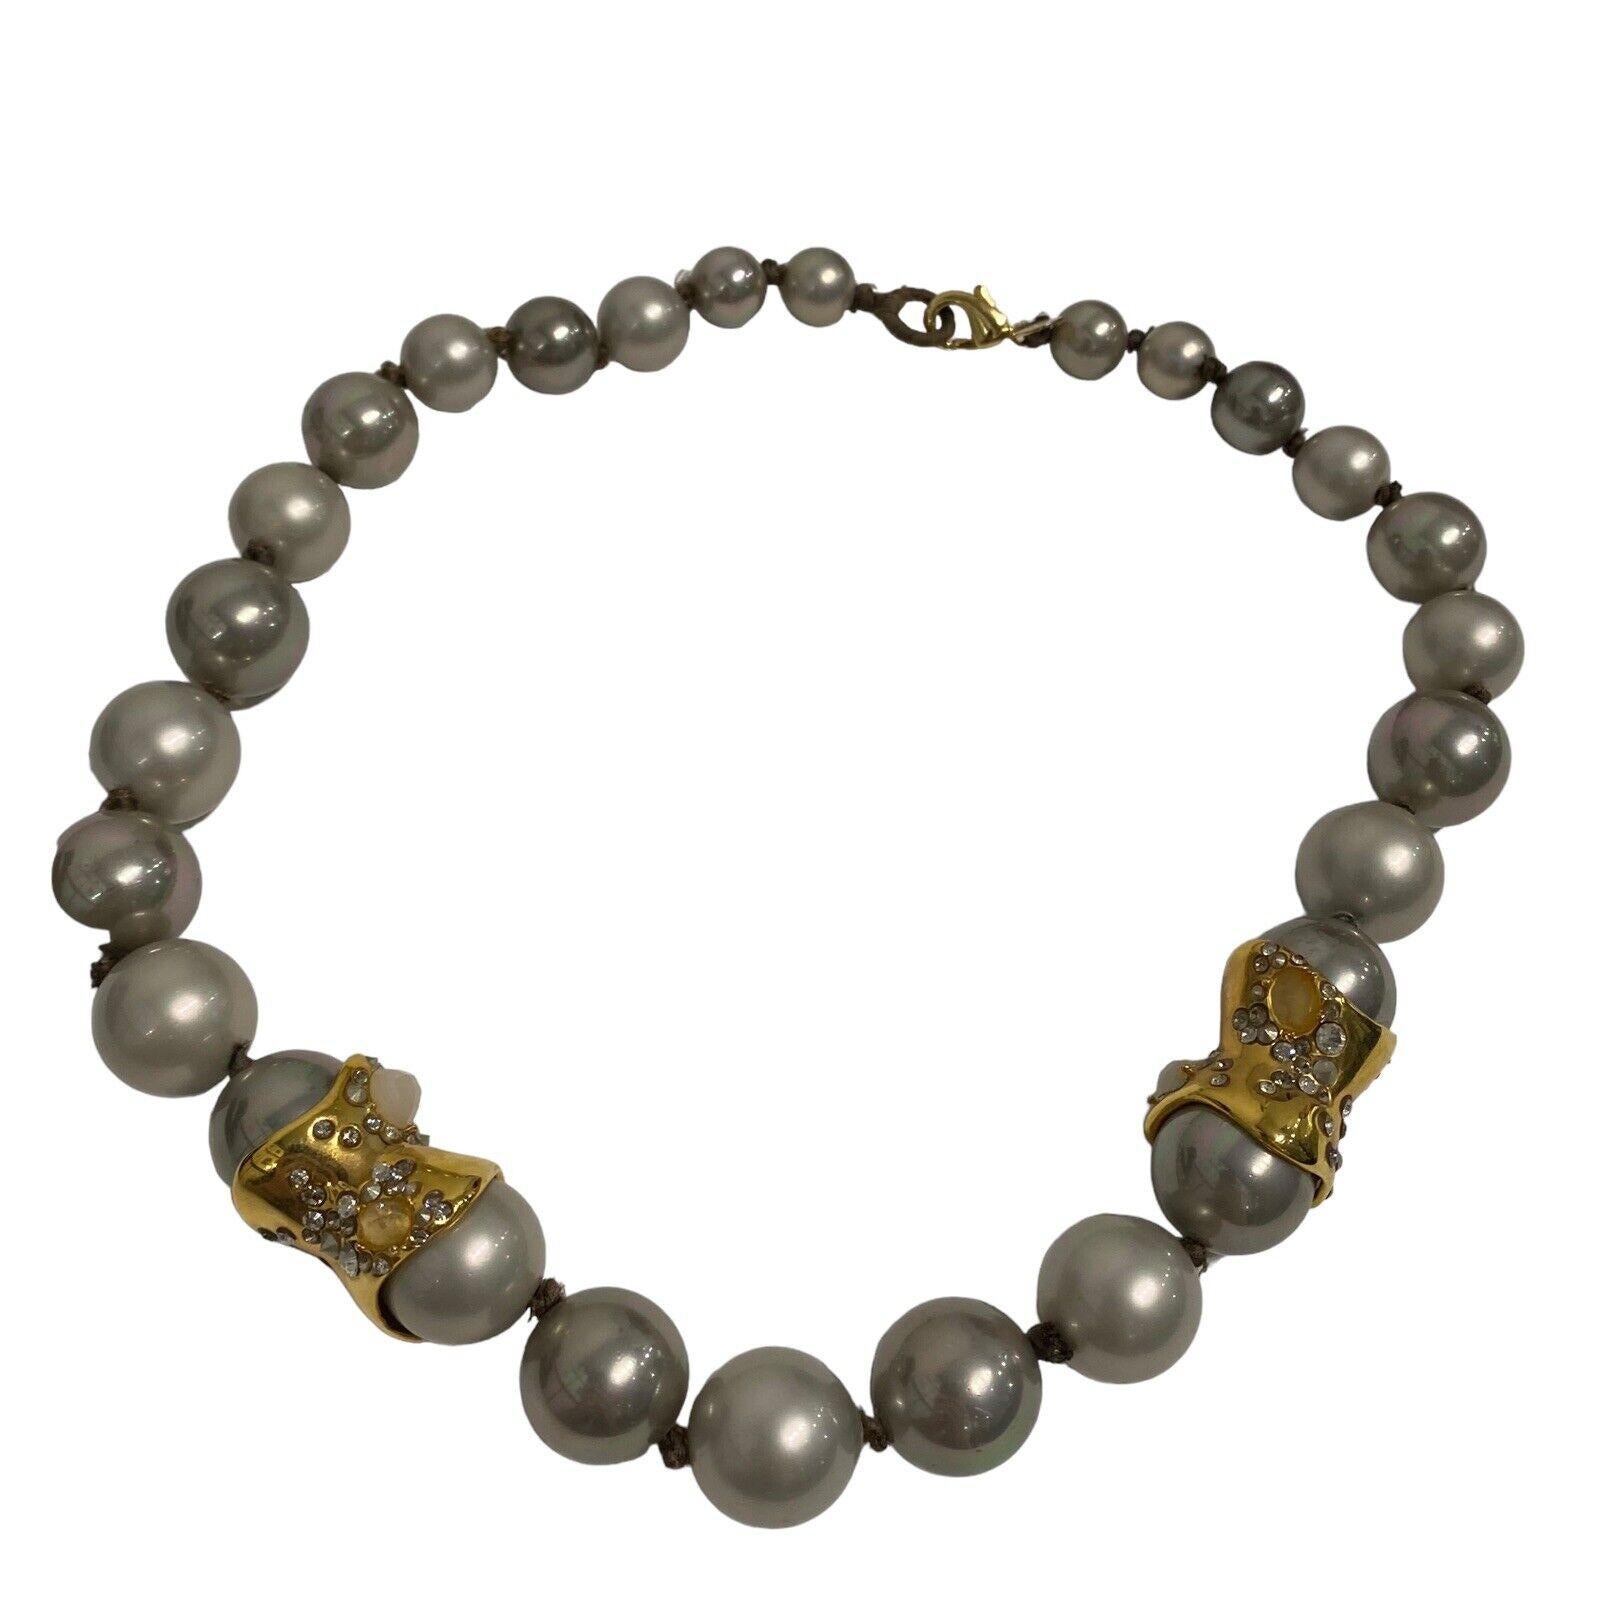 Simply Beautiful! Vintage ALEXIS BITTAR Signed Designer Faux Gray Pearl and Crystal Gilt Choker Necklace. Two Large Gold-Plated Beads with Crystals and Lucite details add a Stylish accent. Hand strung with knots. The necklace measures approx. 16”